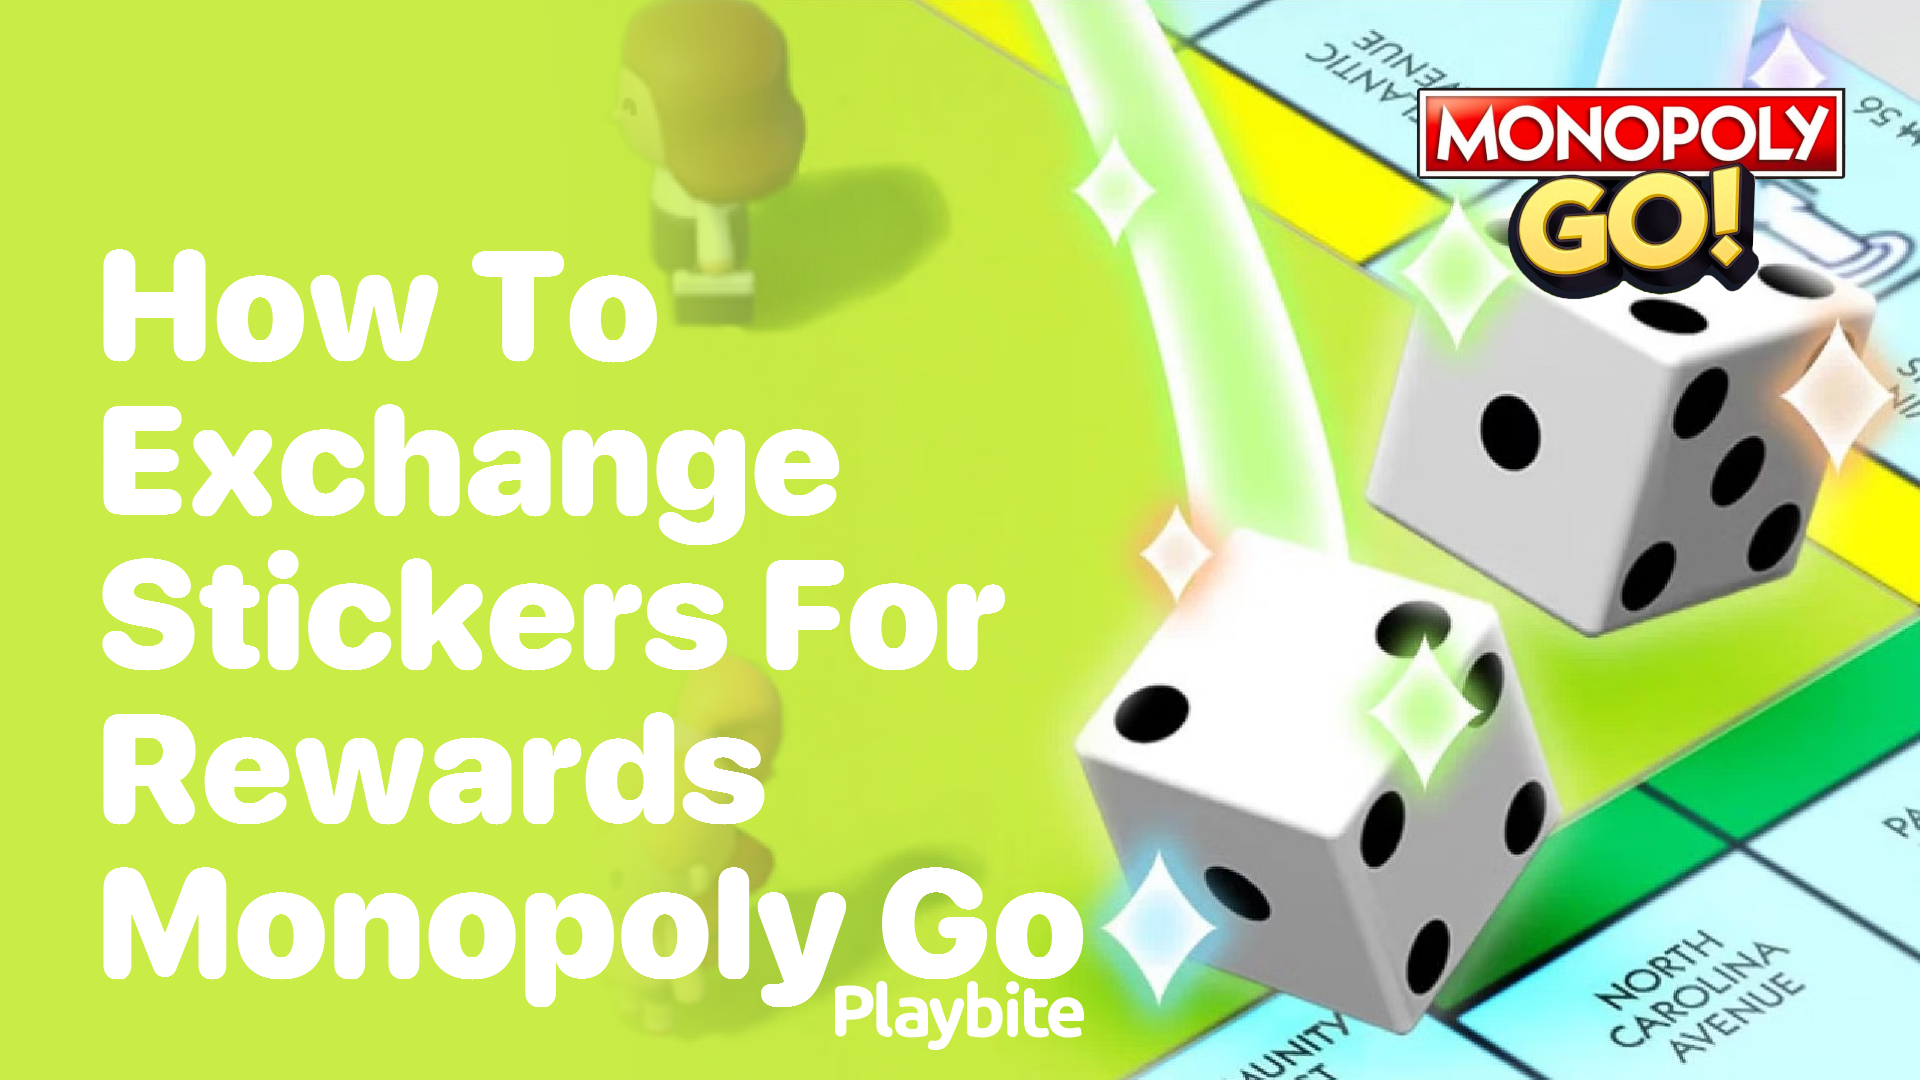 How to Exchange Stickers for Rewards in Monopoly Go